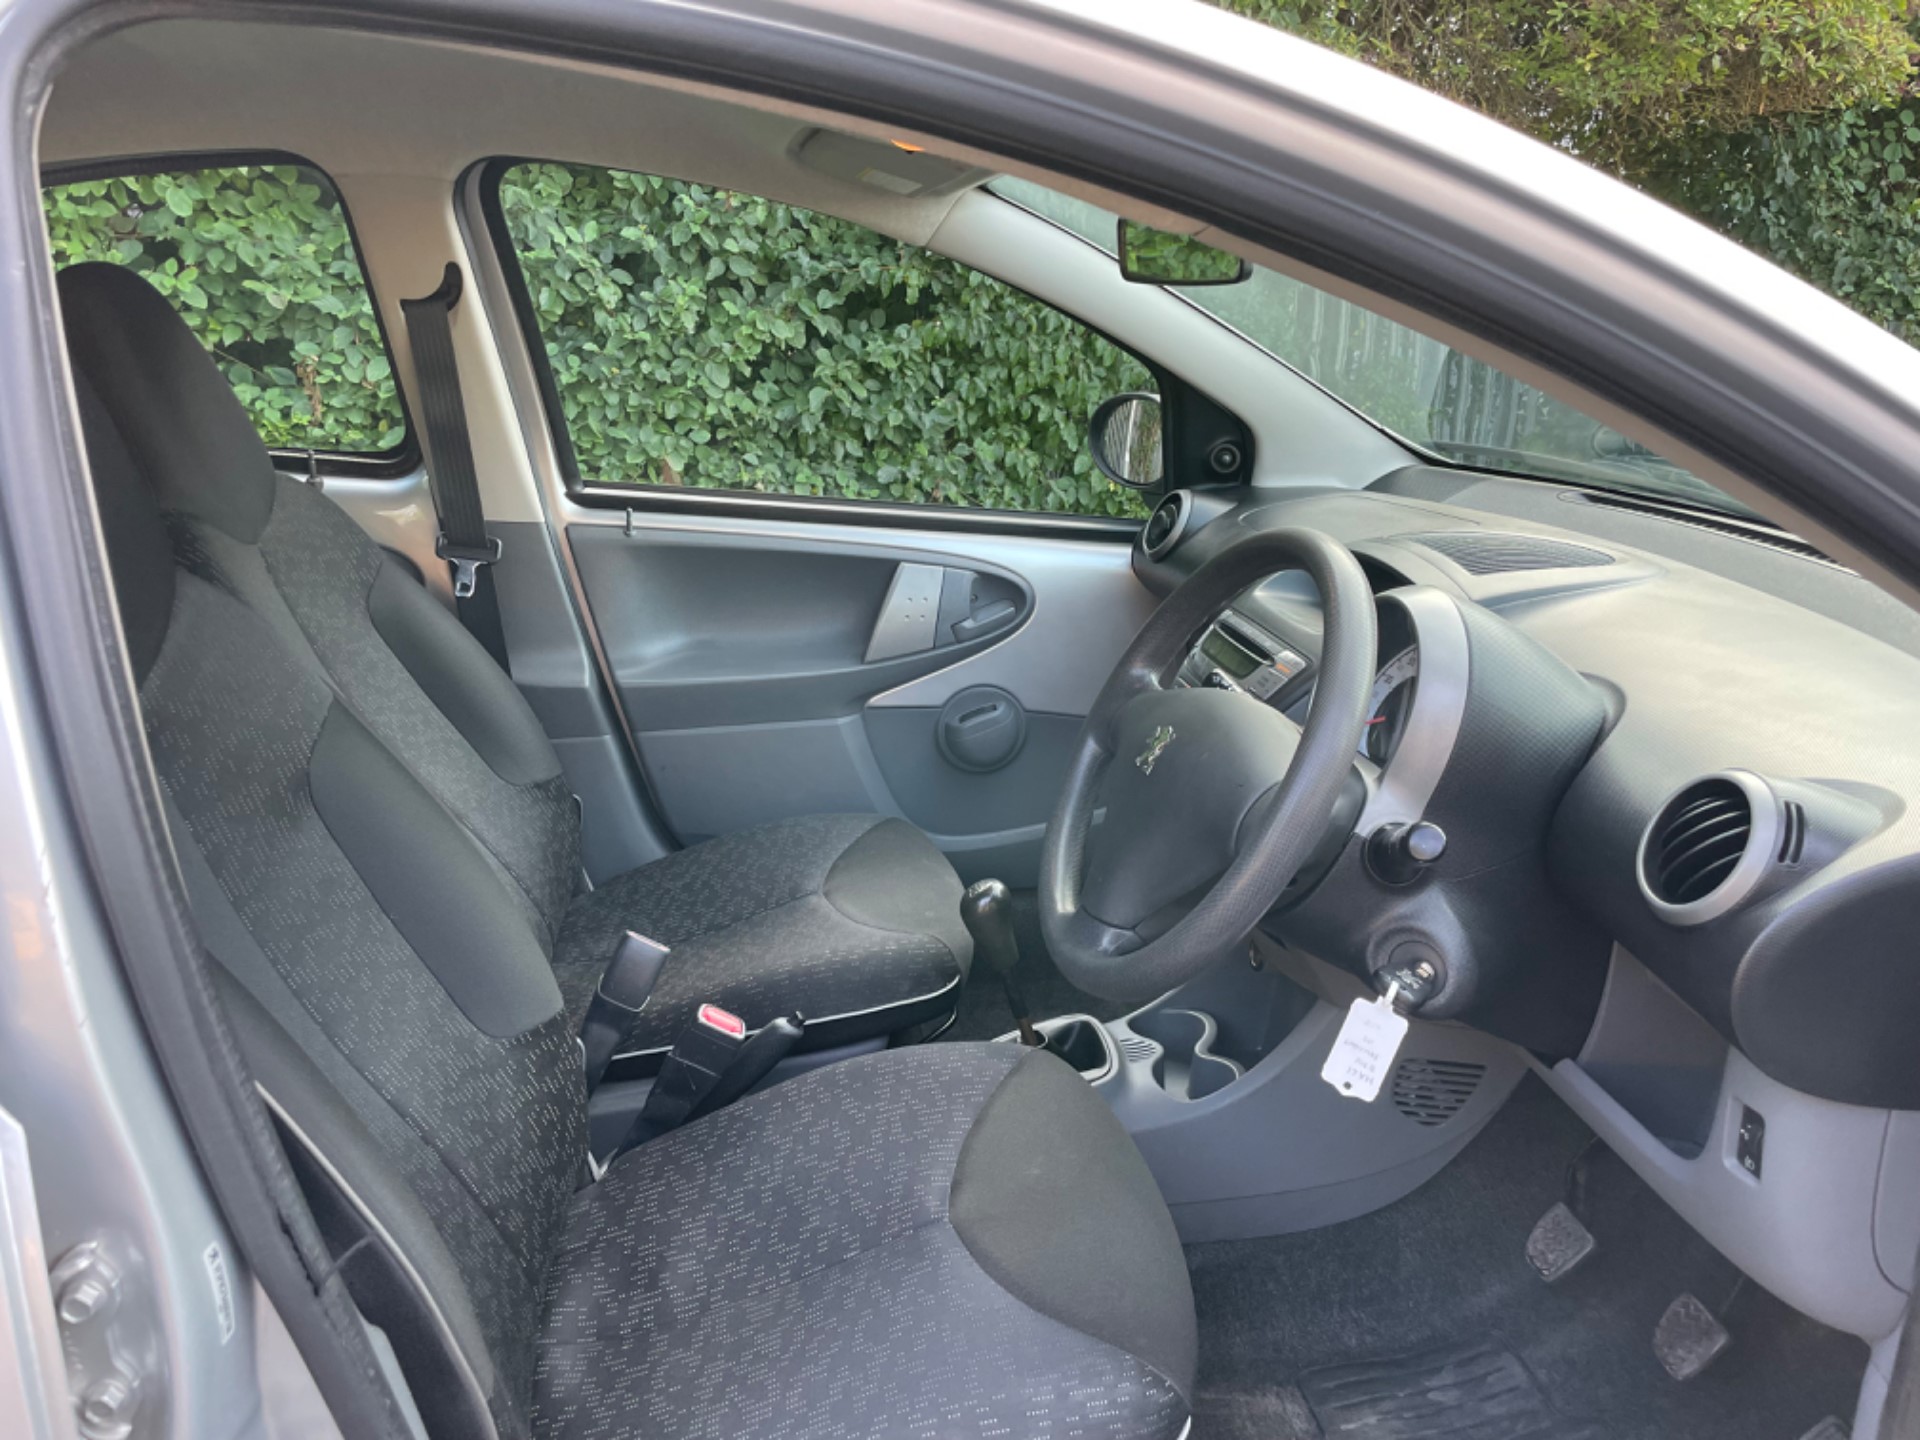 Used Peugeot 107 for sale in Bourne, Lincolnshire